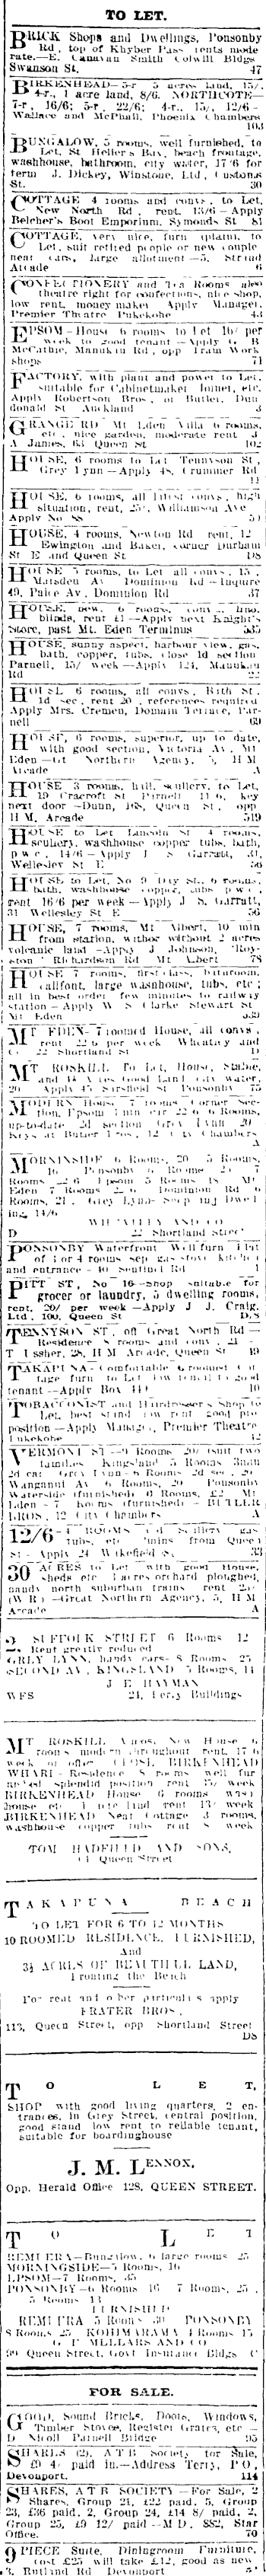 Papers Past Newspapers Auckland Star 19 May 1915 Page 3 Advertisements Column 3